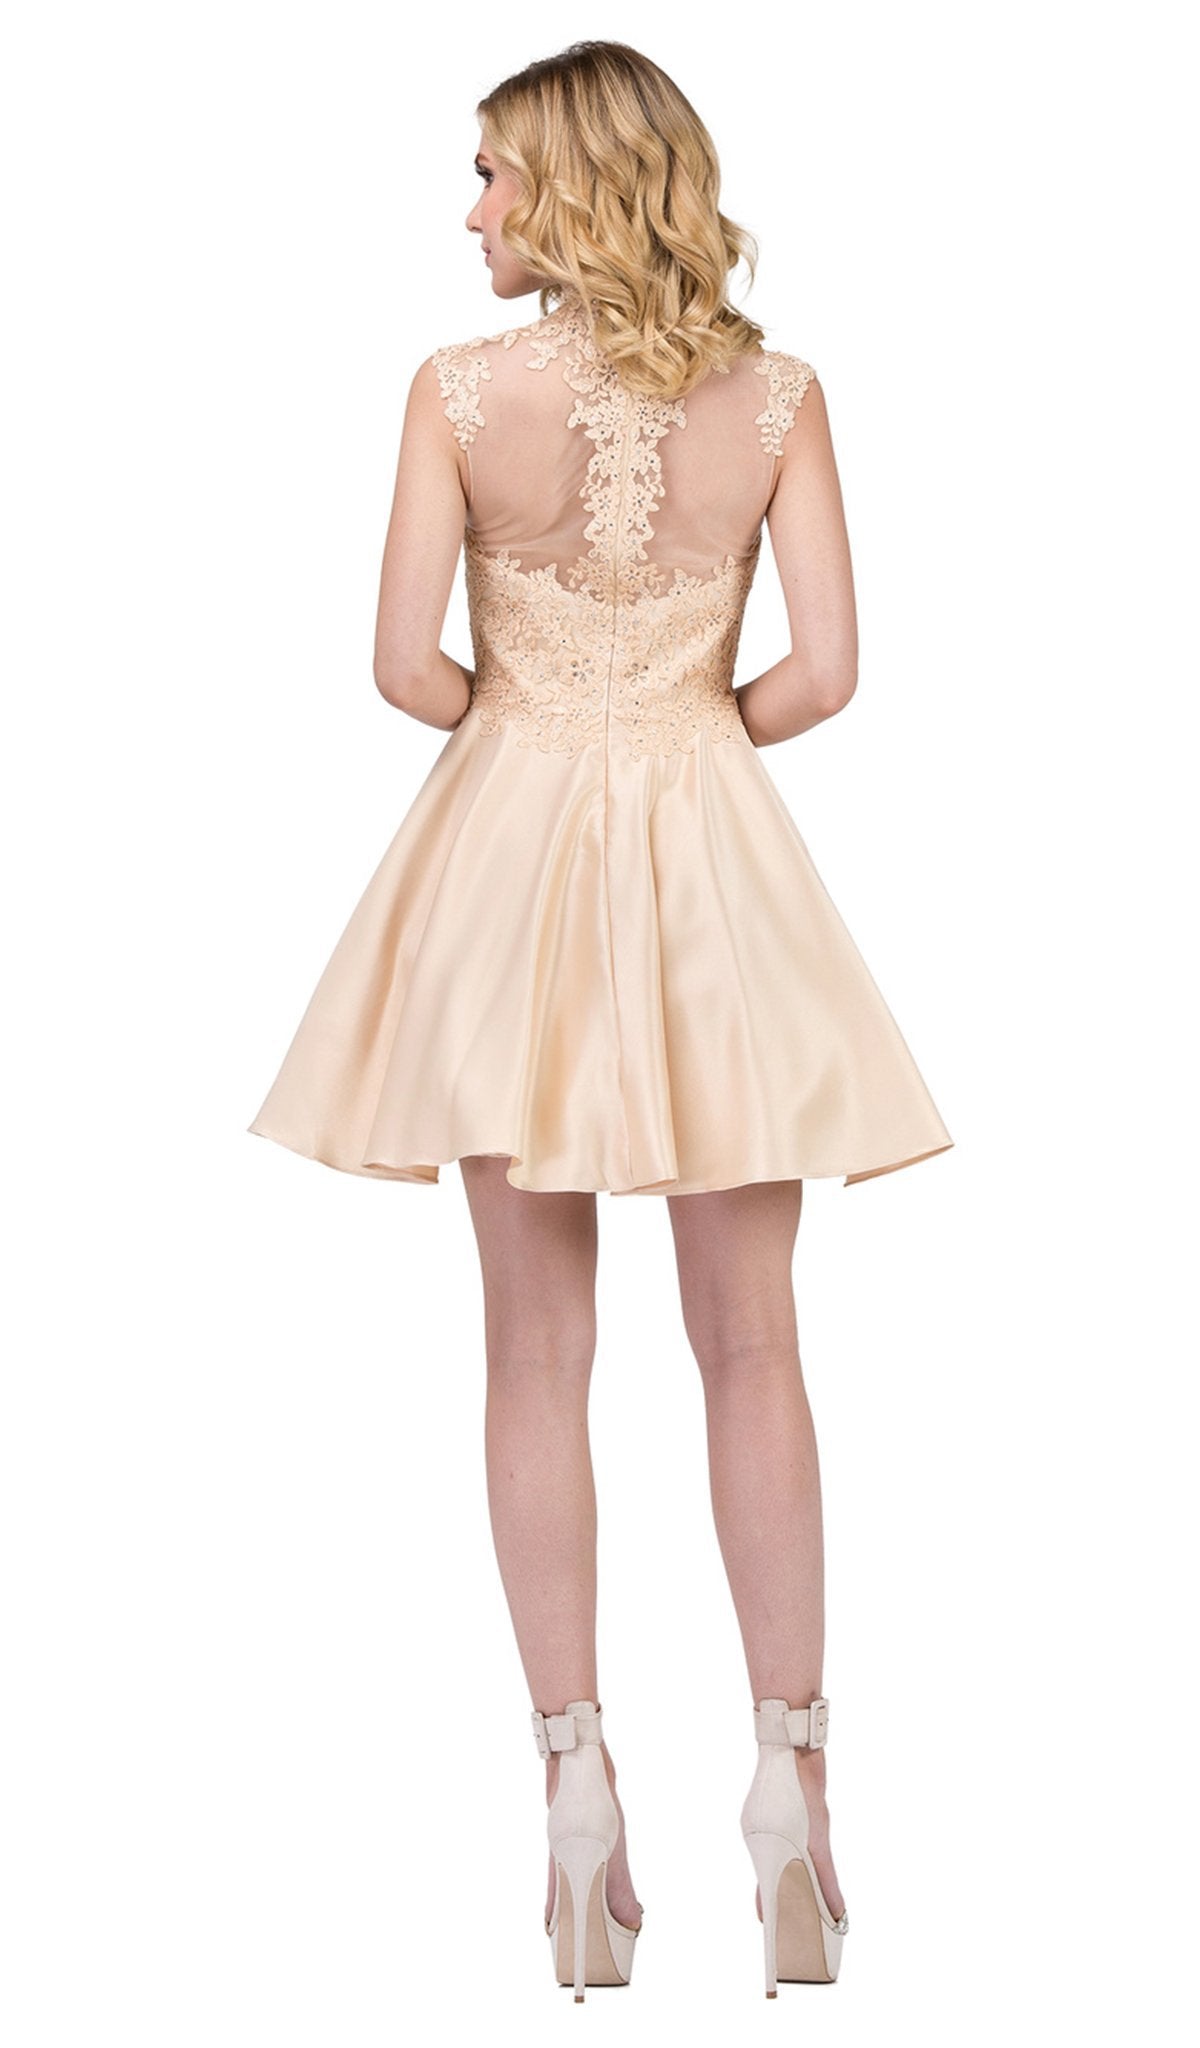 Dancing Queen - 3069 Appliqued Illusion High Neck Homecoming Dress in Neutral